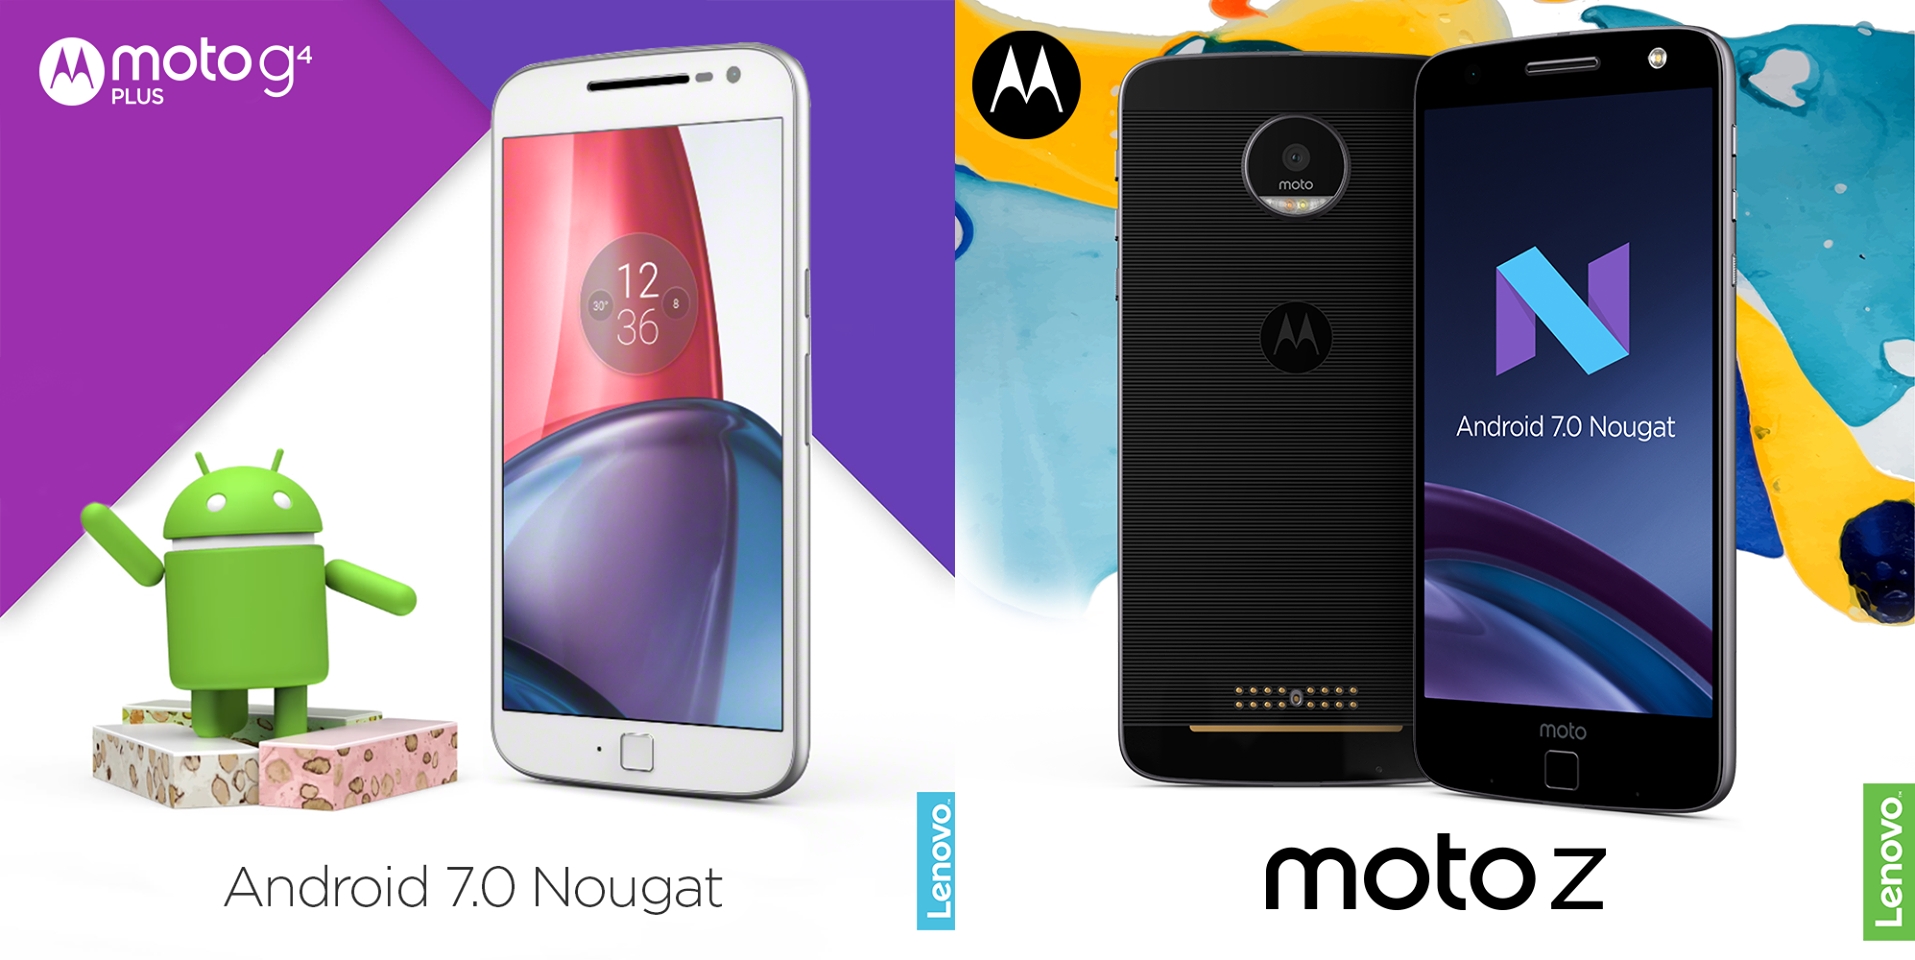 moto g4 plus moto z to android 7 | Android 7.0 | [Official] Moto Z และ Moto G4 Plus ในไทย!! อัพเดต Android 7.0 Nougat ภายในสัปดาห์นี้